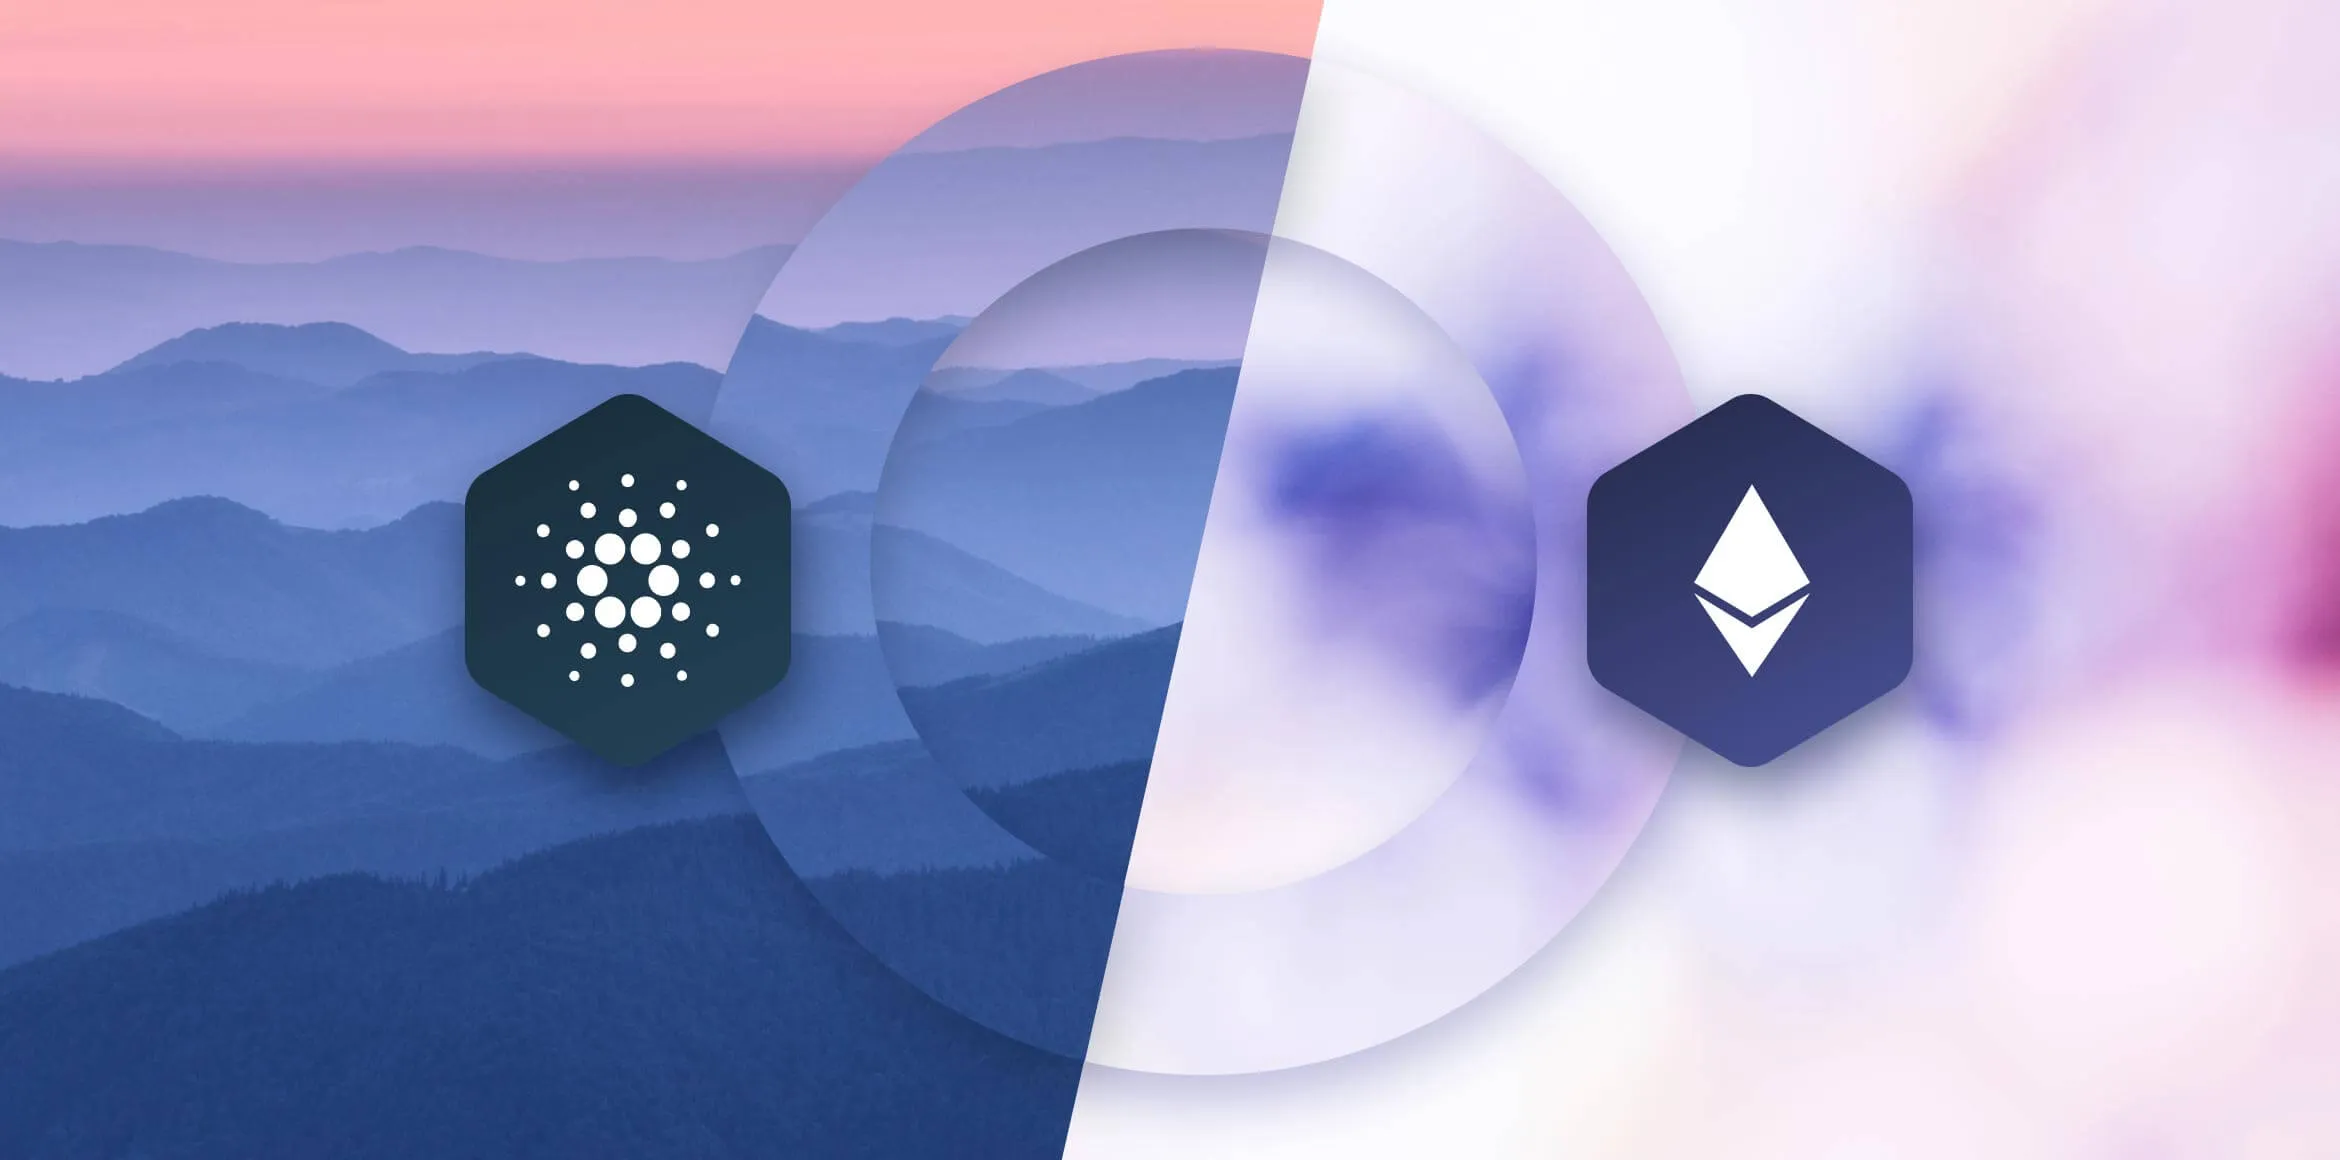 Cardano vs Ethereum: Why Cardano Emerges as the Superior Choice